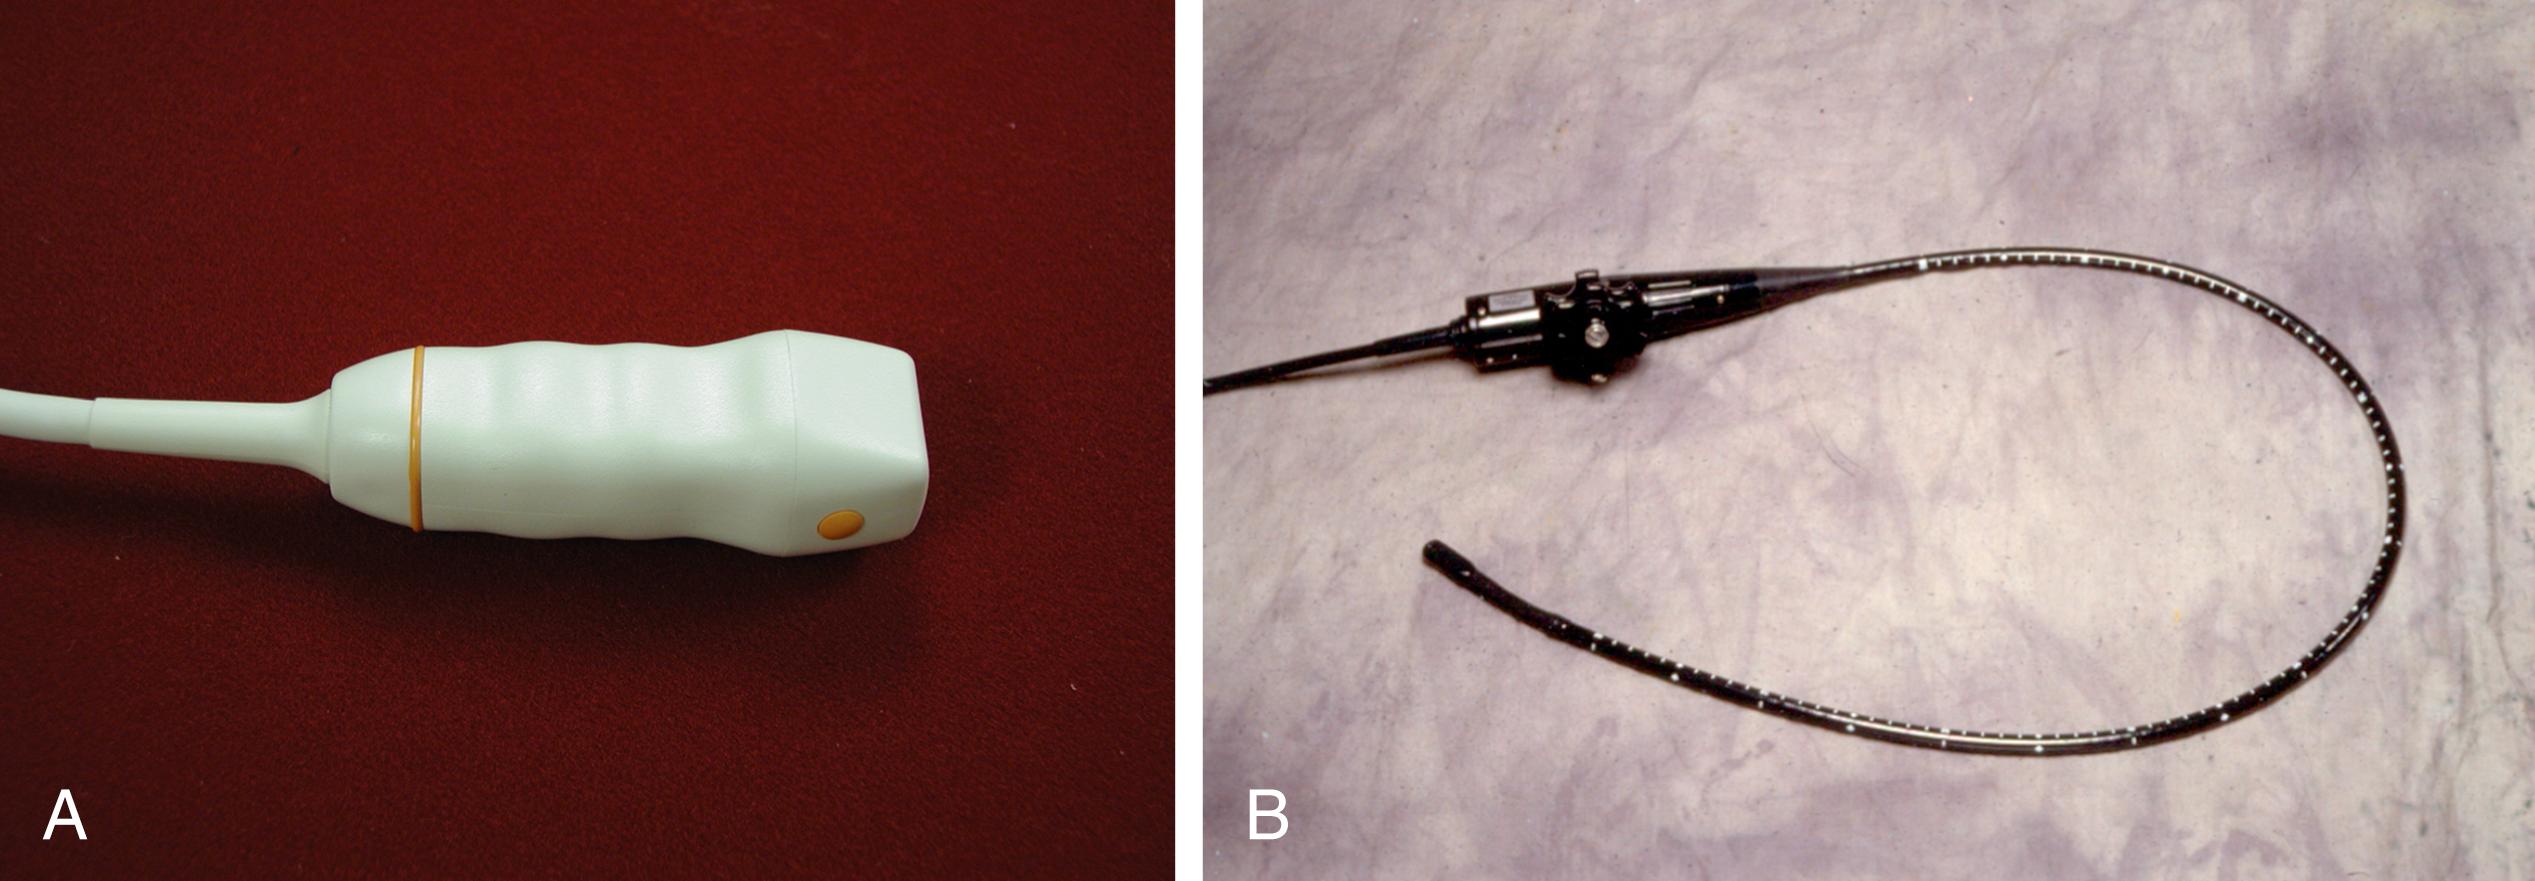 Figure 1.1, A, Transthoracic transducer. B, Transesophageal transducer.